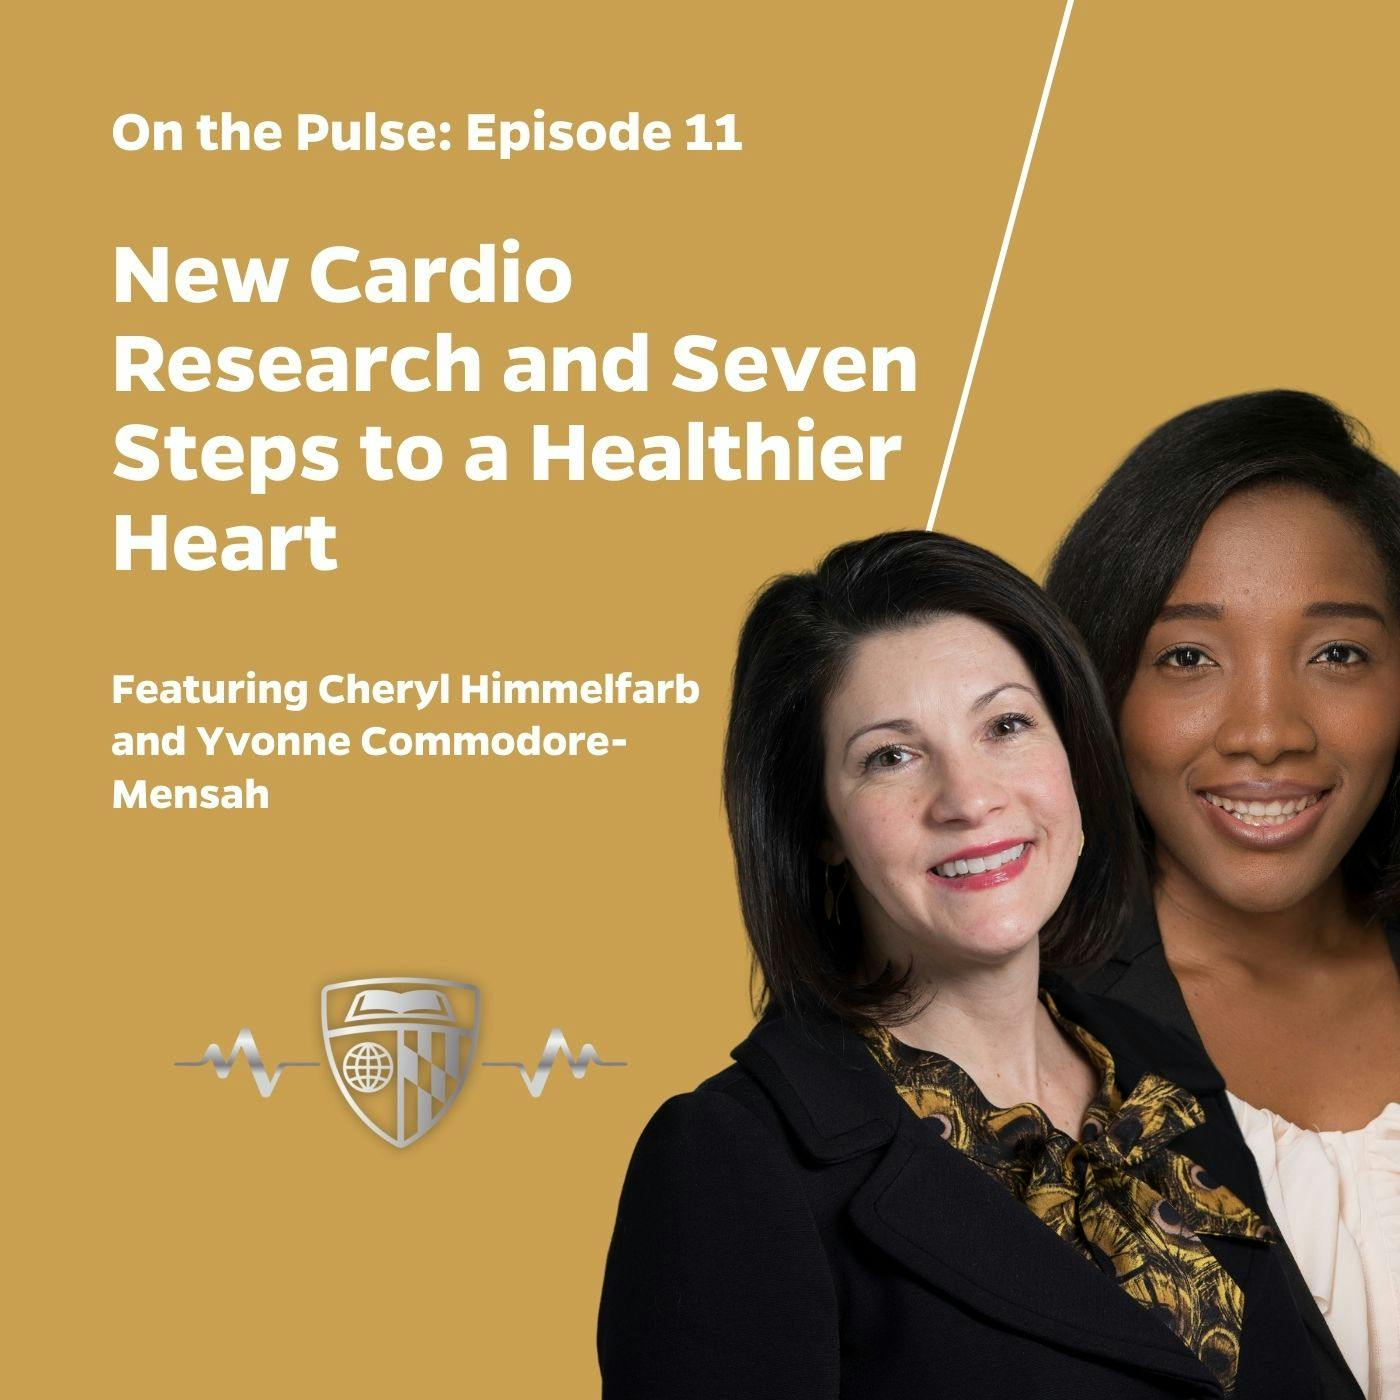 Episode 11: New Cardio Research and Seven Steps to a Healthier Heart